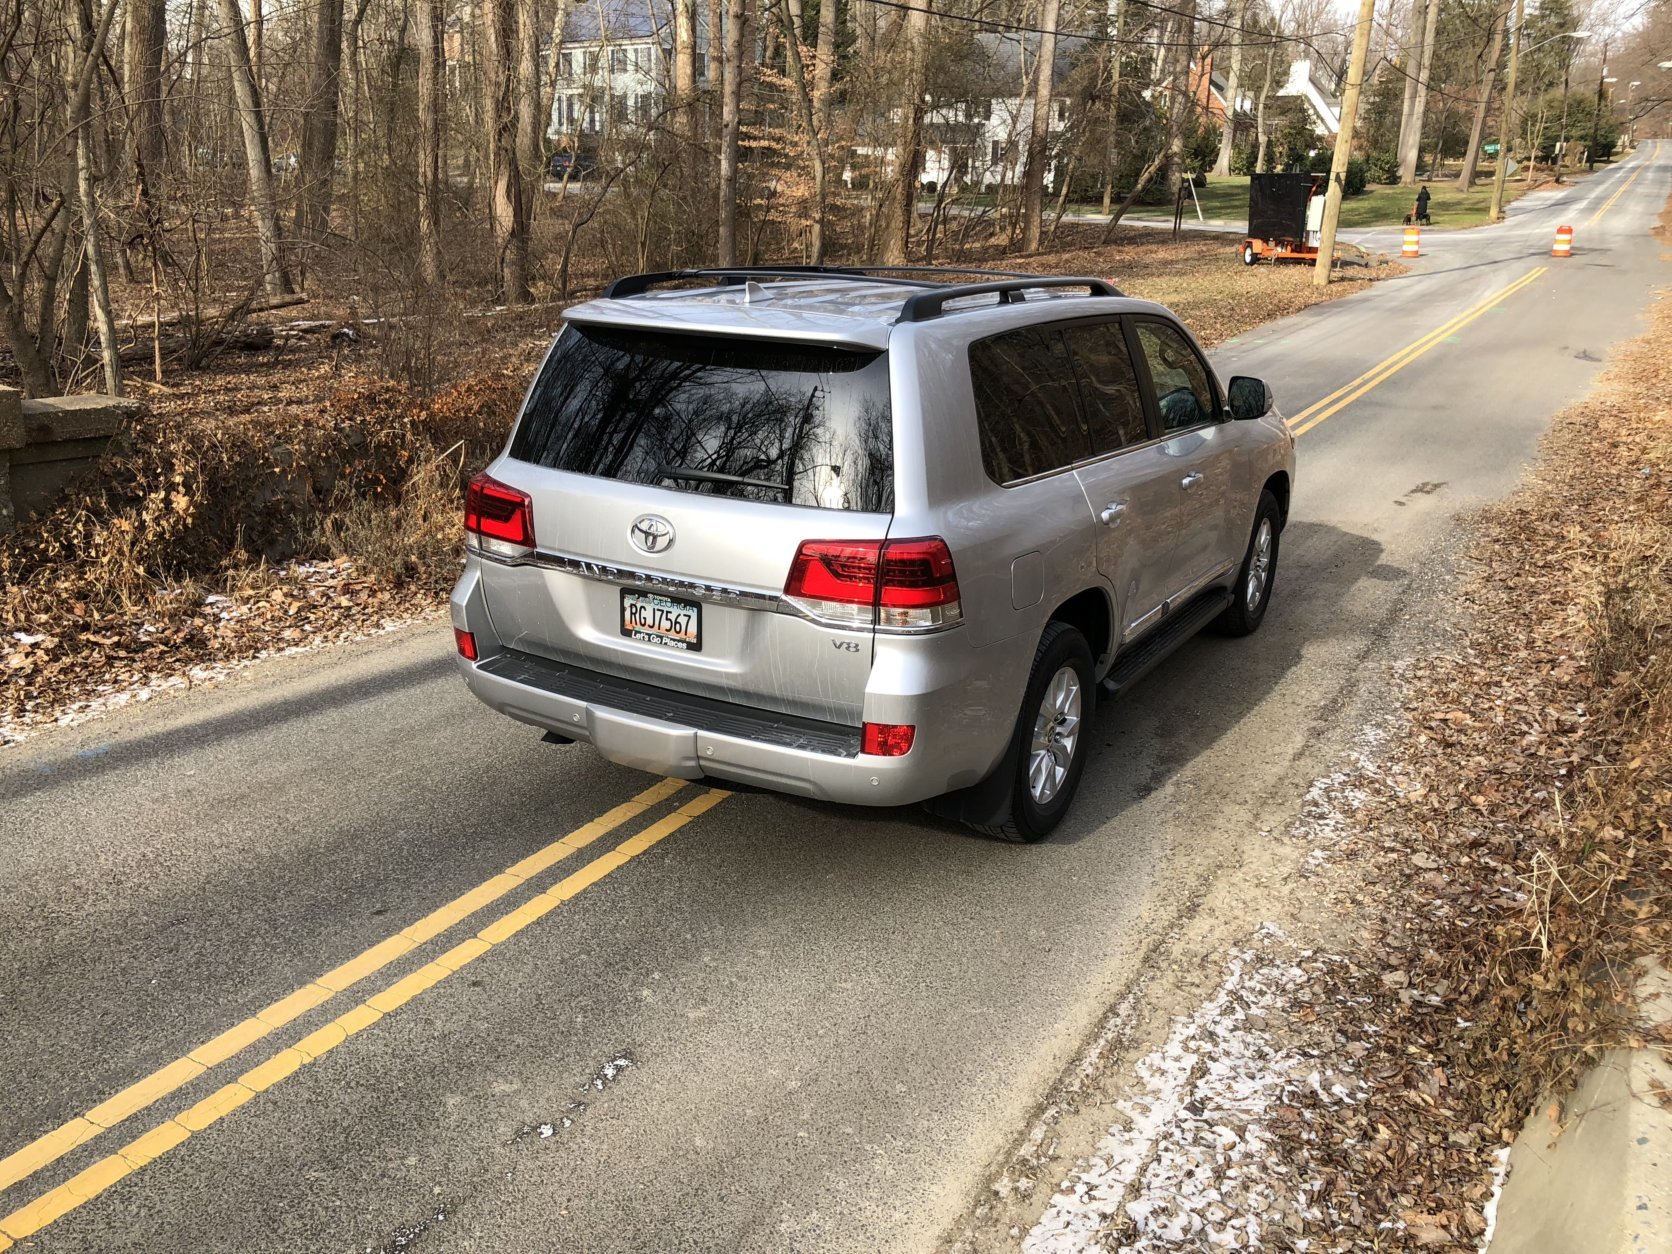 The lines are simple and time tested with no dramatic angles or exaggerated lines. The Land Cruiser doesn’t need that to get the point across.  (WTOP/Mike Parris)